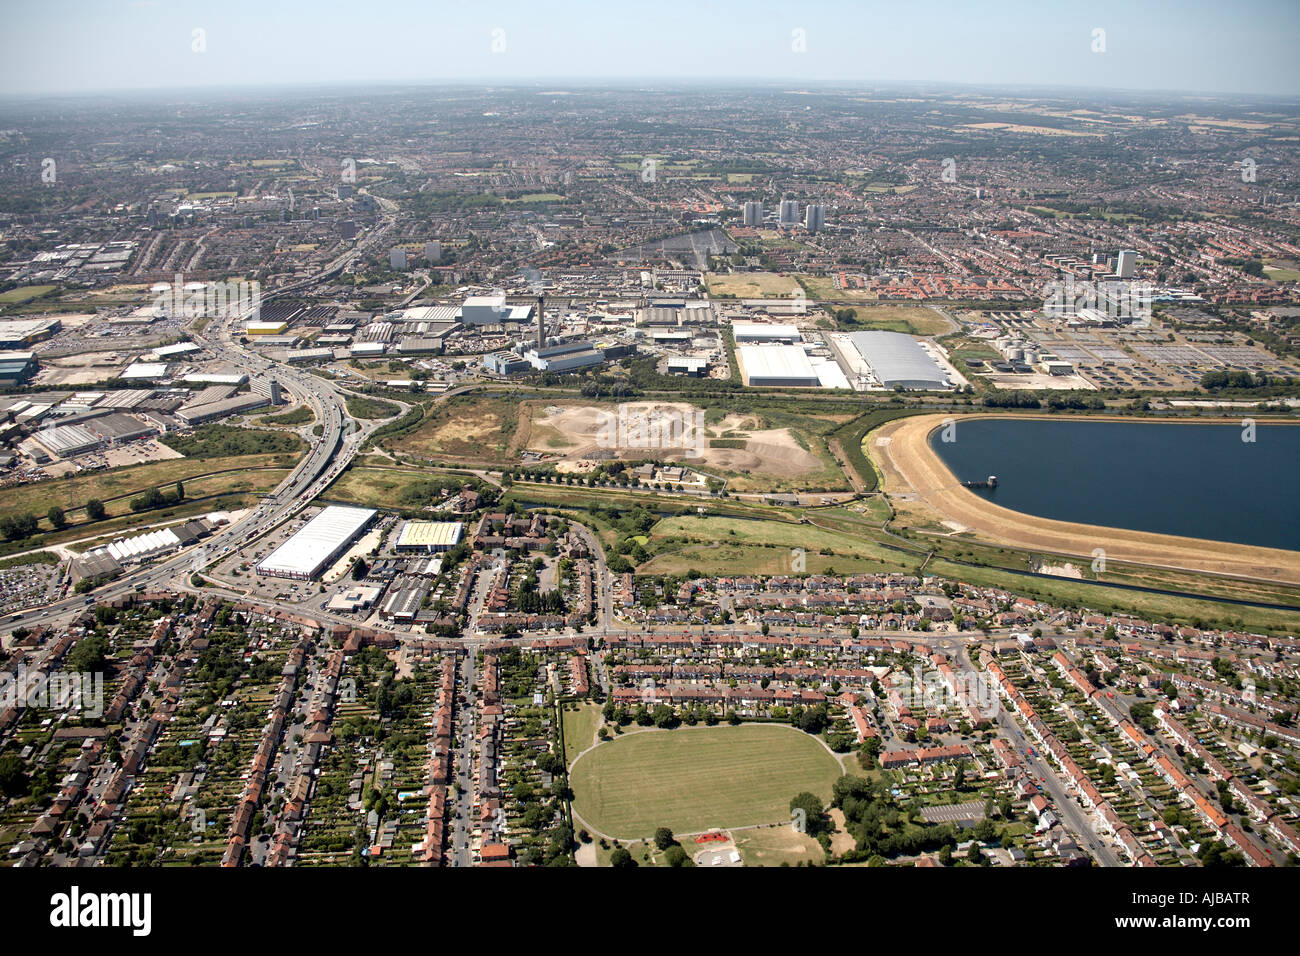 Aerial view east of A406 William Girling Reservoir Enfield London N9 N18 England UK High level oblique Stock Photo